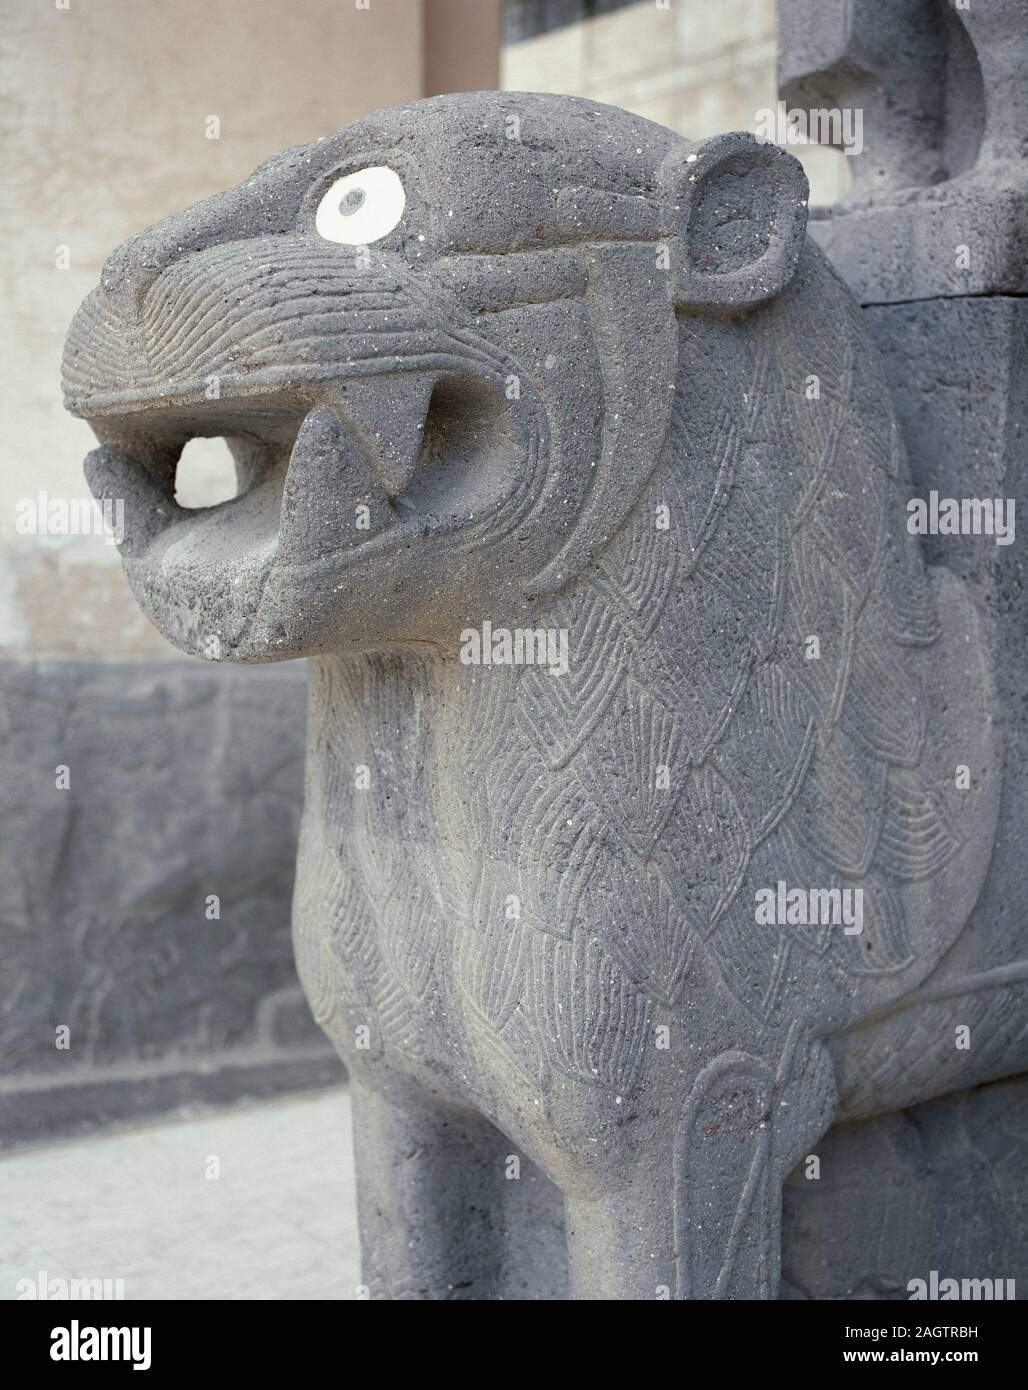 Eastern Mediterranean Civilizations. Syria. Halaf Culture (6100-5100 BC). Iron Age. Neo-Hittite Settlement of Tell Halaf. Sculpture depicting a head of a lion which guarded the Tell Halaf Temple. Entrance of The National Museum of Aleppo. (Photo taken before the Syrian Civil War). Stock Photo